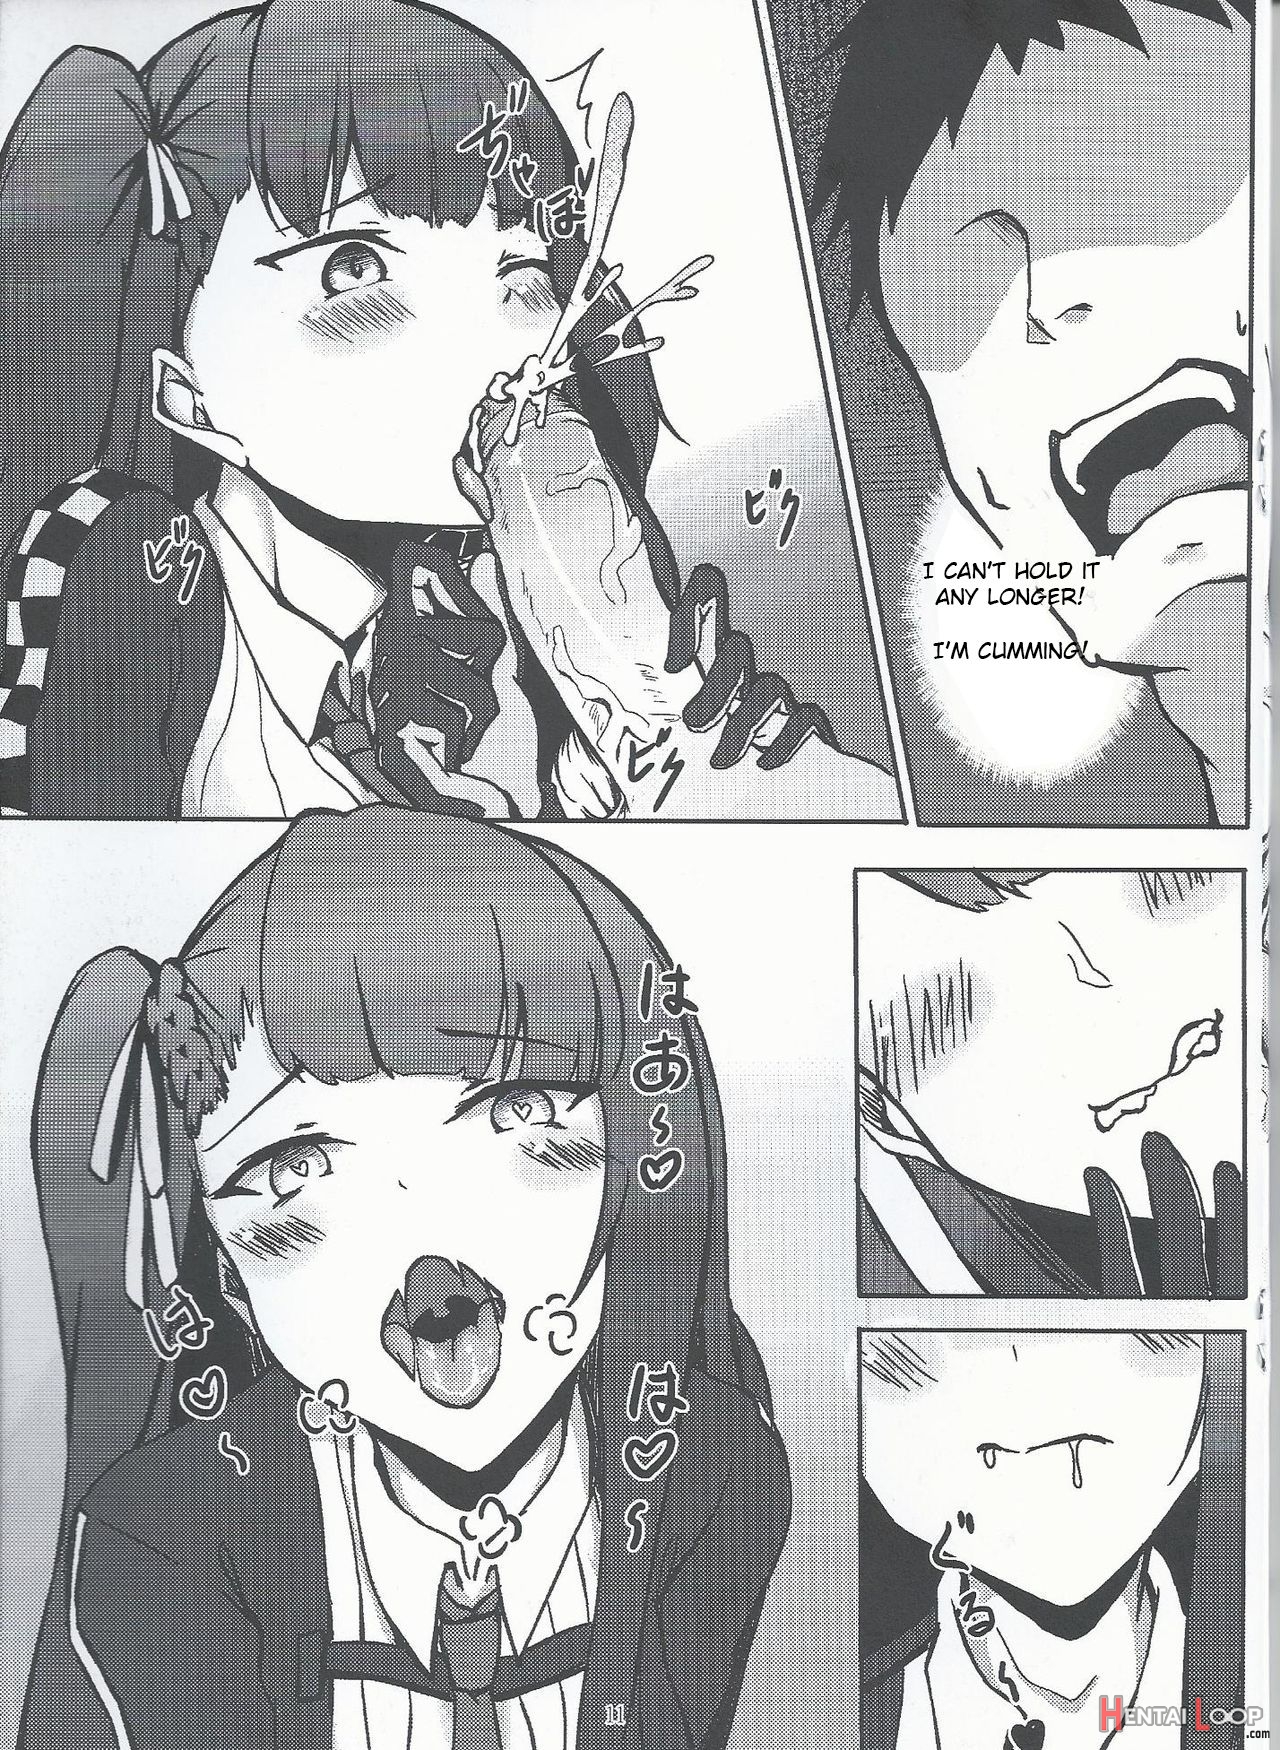 I Don’t Know What To Title This Book, But Anyway It’s About Wa2000 page 10